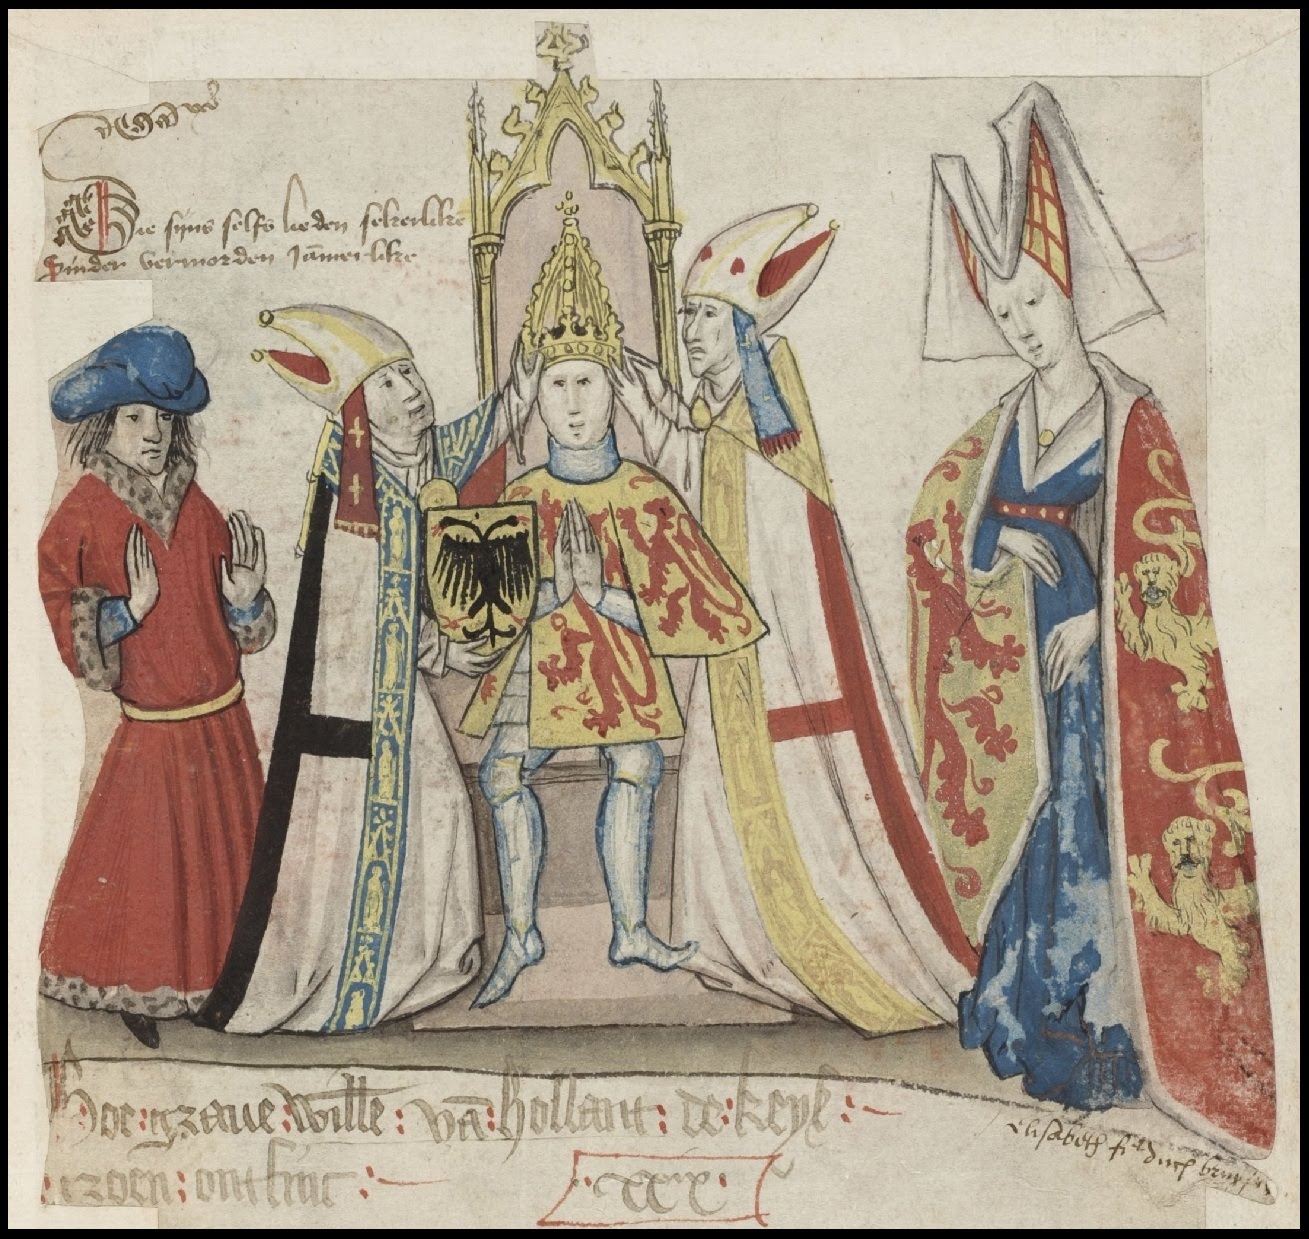 medieval manuscript illustration of Duke on throne being crowned by biships